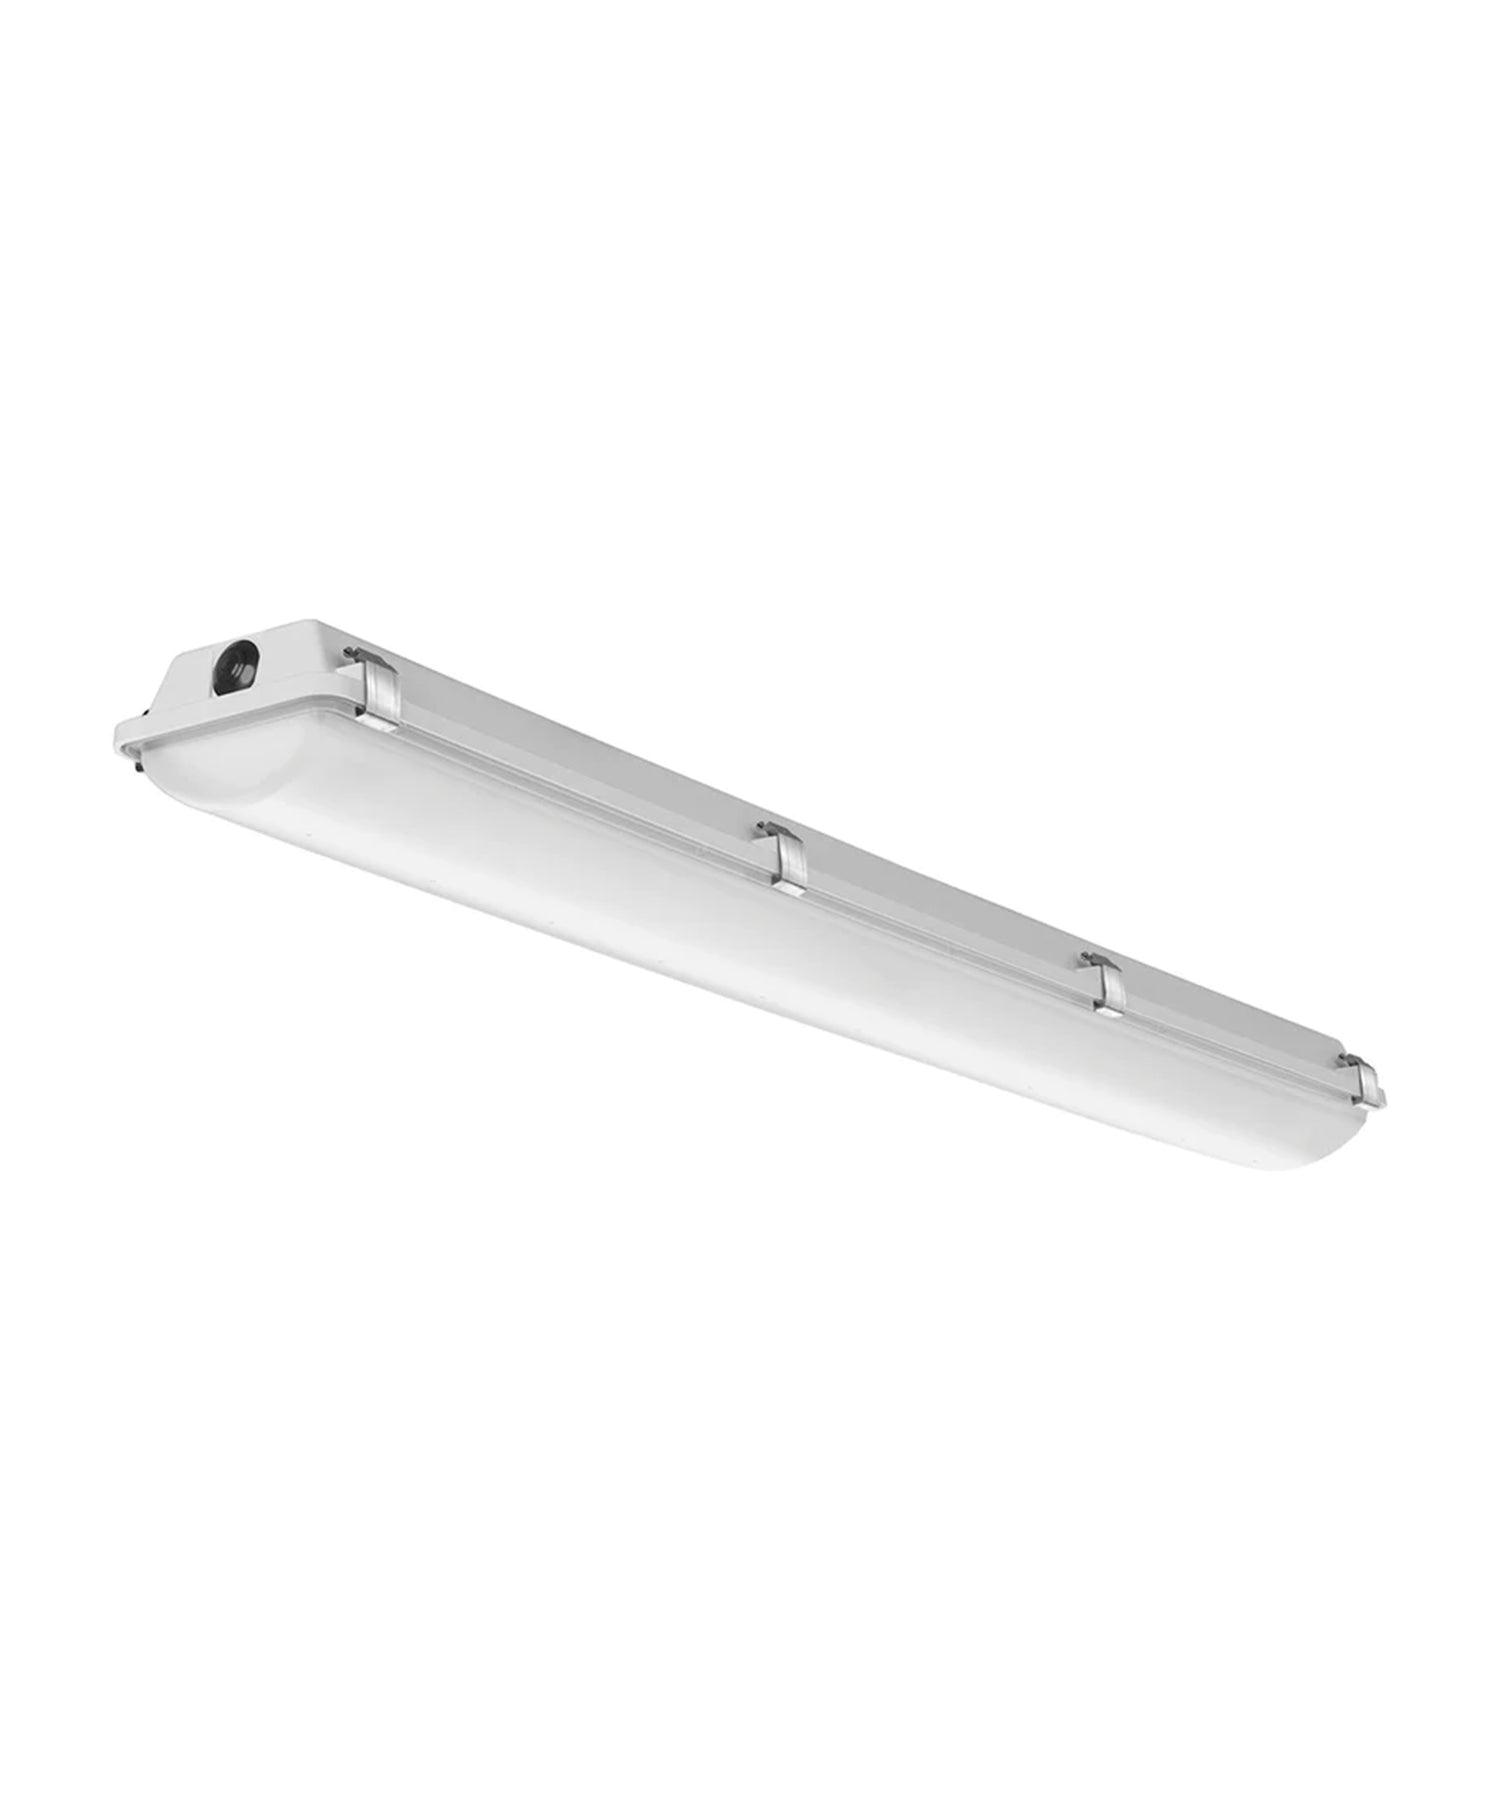 Lithonia LED Vapor Tight Fixtures - Bees Lighting